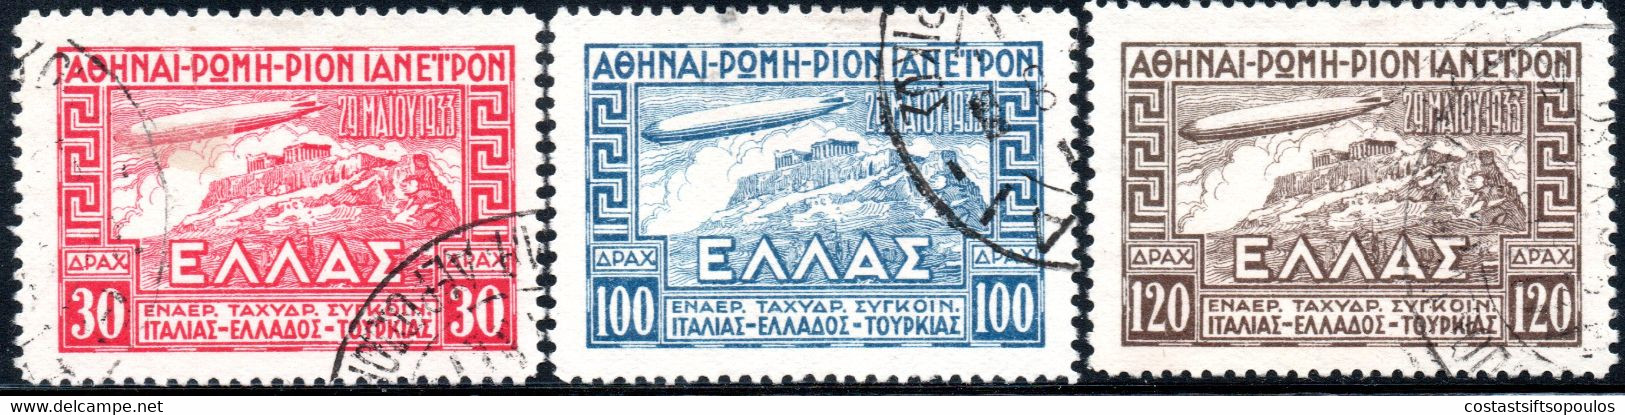 762.GREECE.1933 ZEPPELIN # 5-7 - Used Stamps